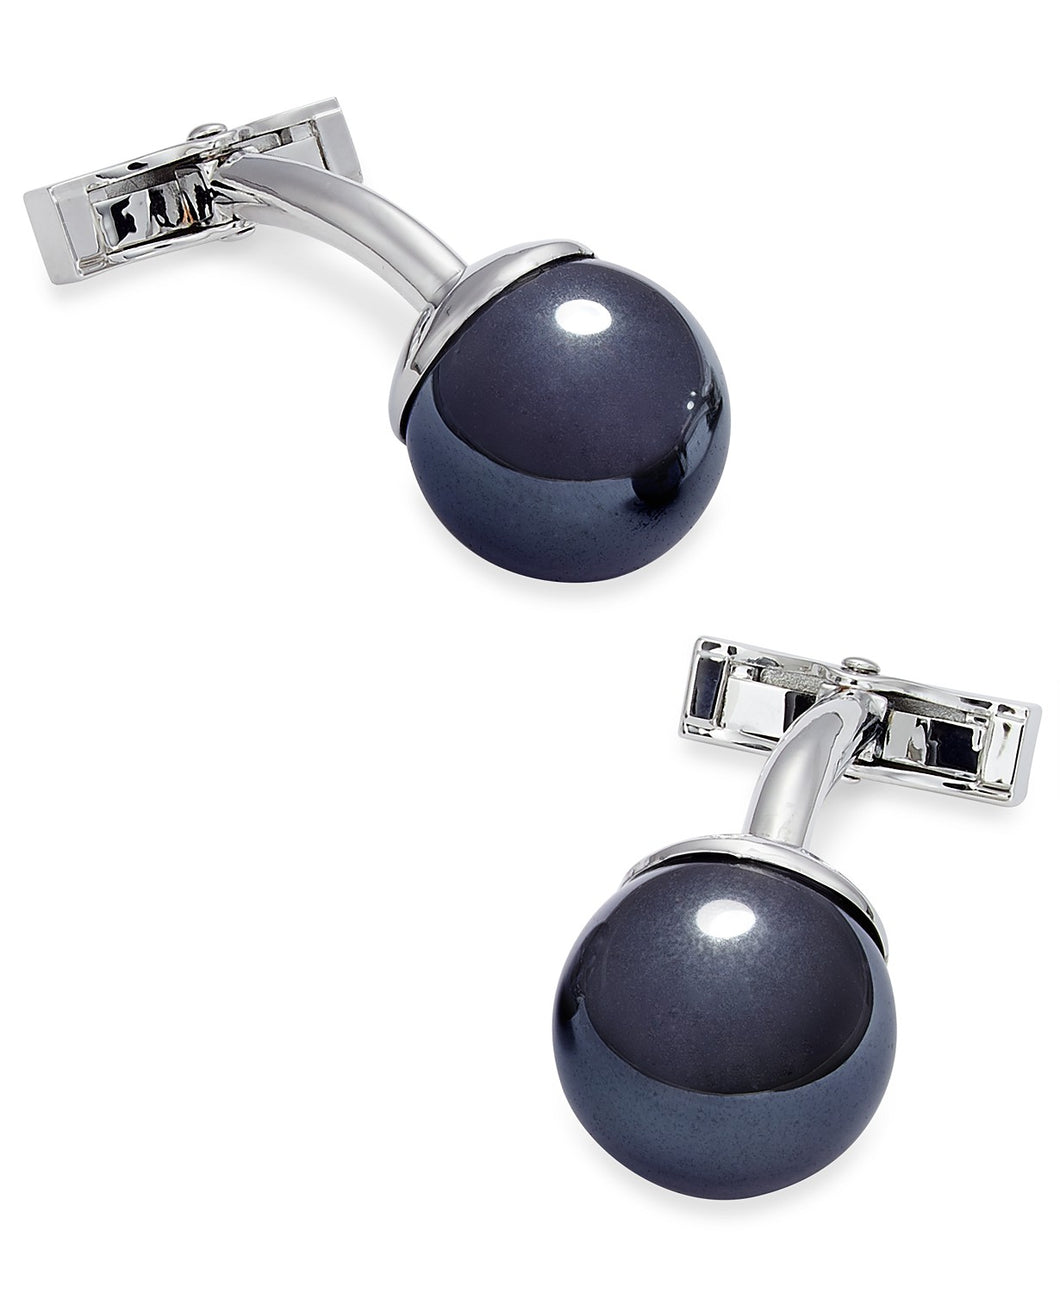 Sutton by Men's Stainless Steel Metallic Black Imitation Pearl Cuff Links